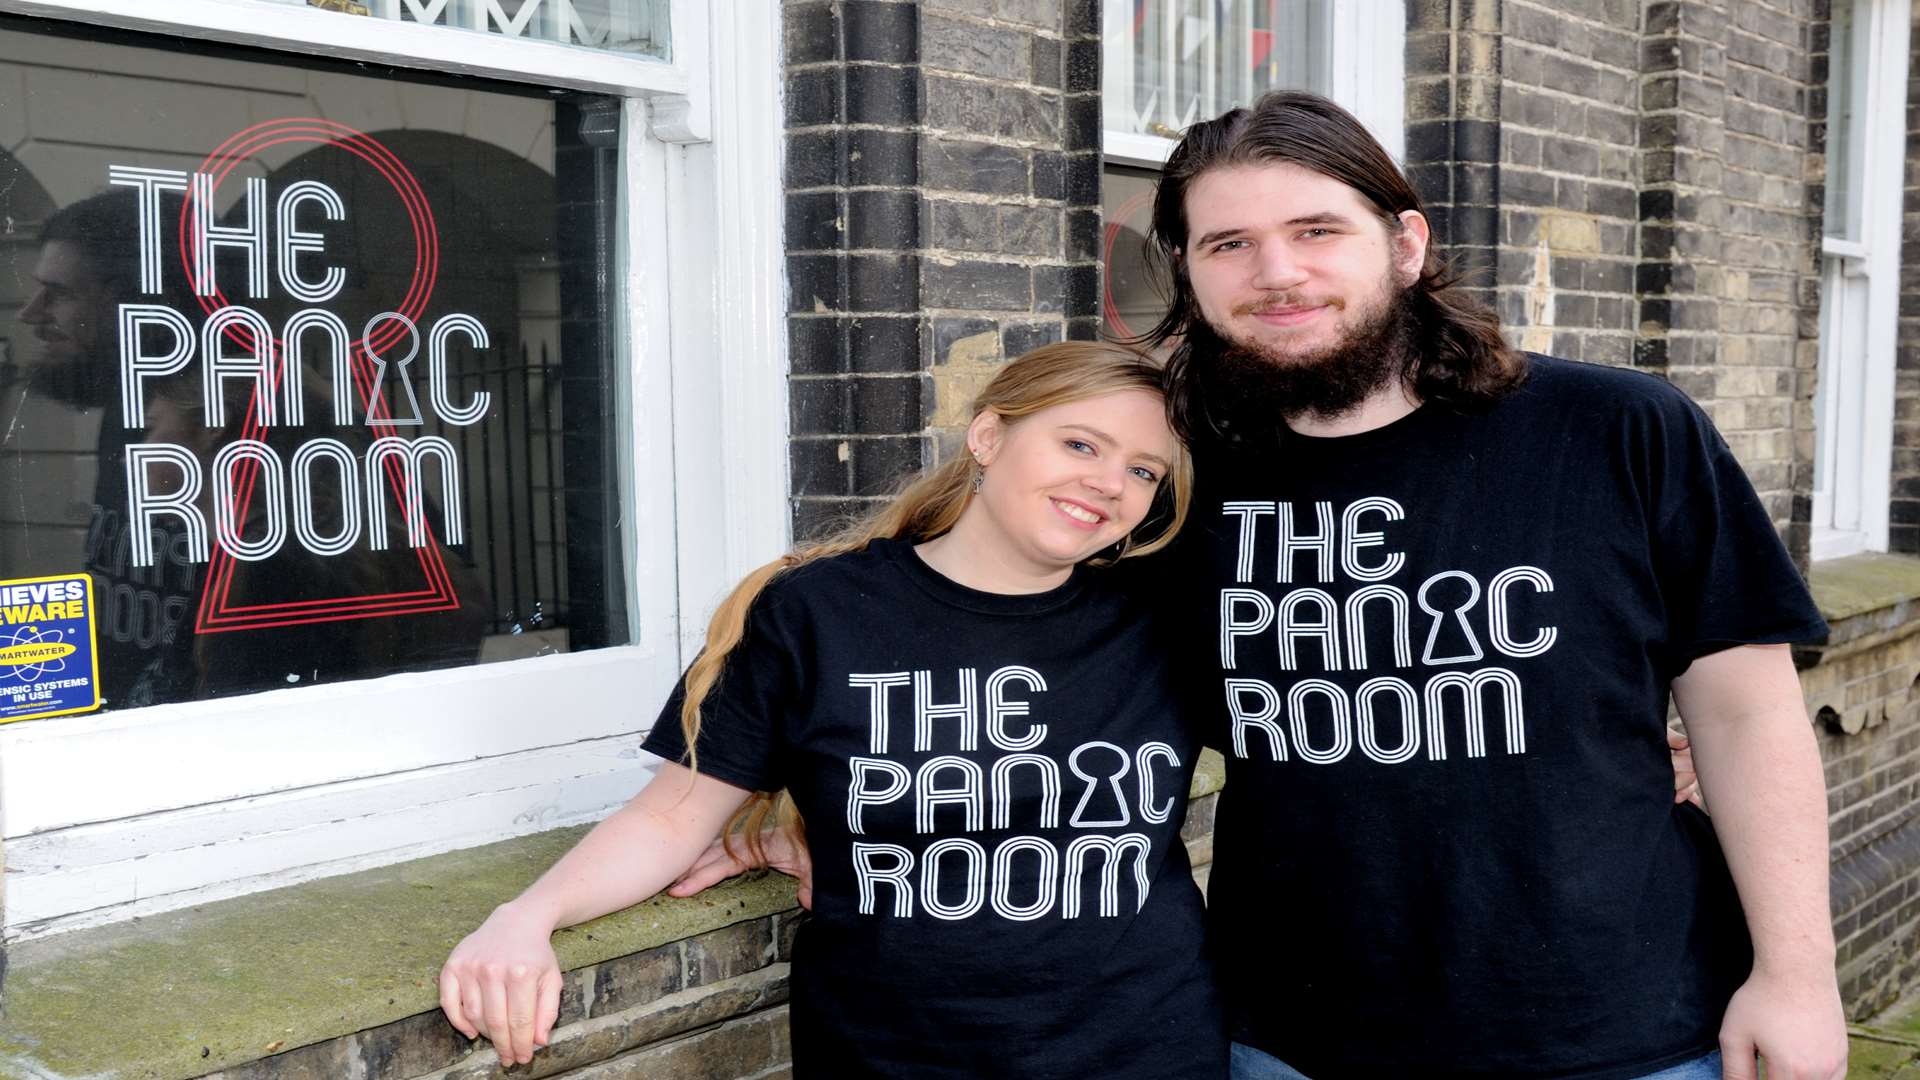 The Panic Room is now open! An escape room attraction set up by Alex and Monique Souter.